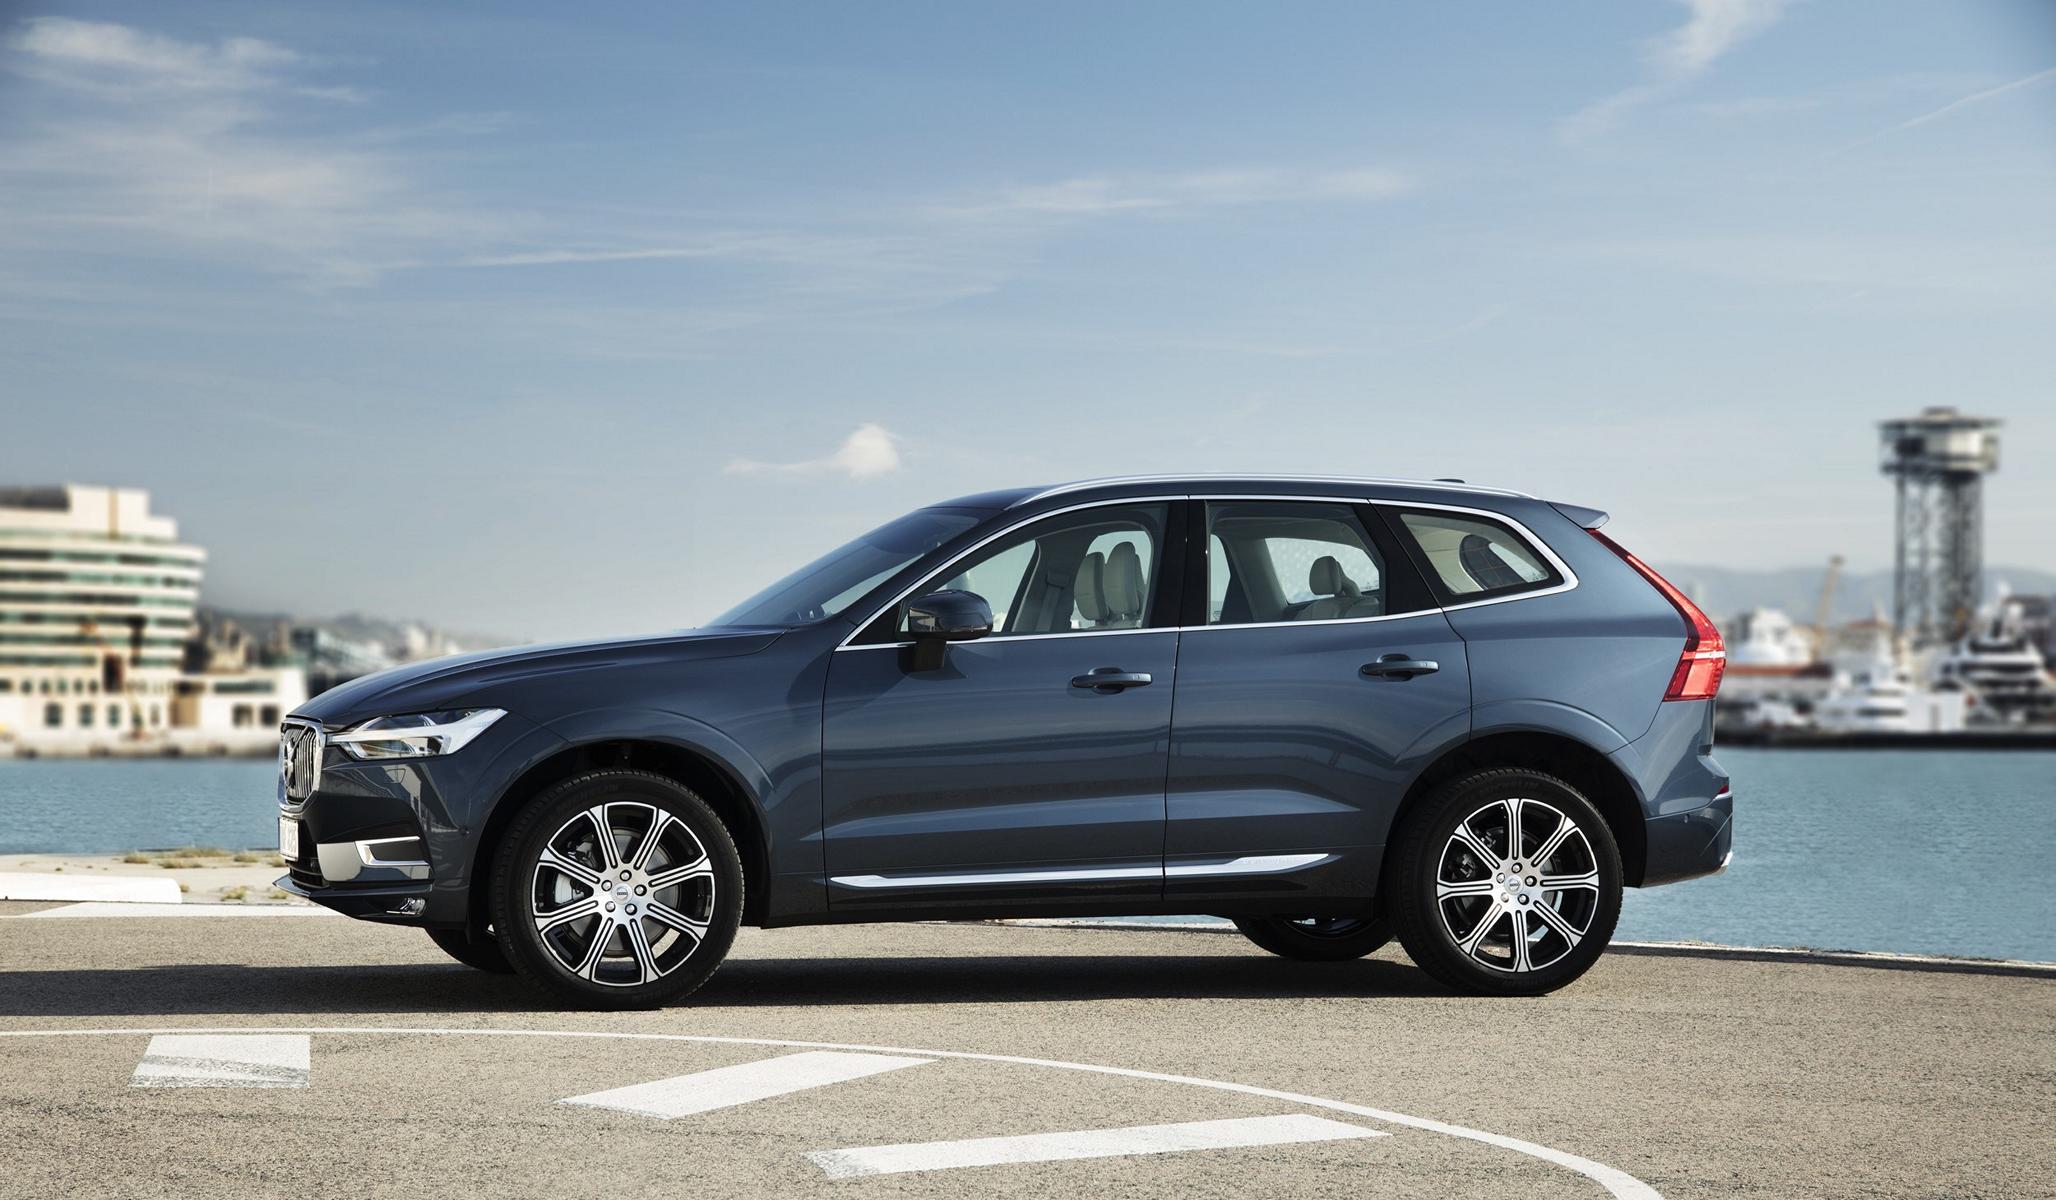 K1600 208163 The new Volvo XC60 T6